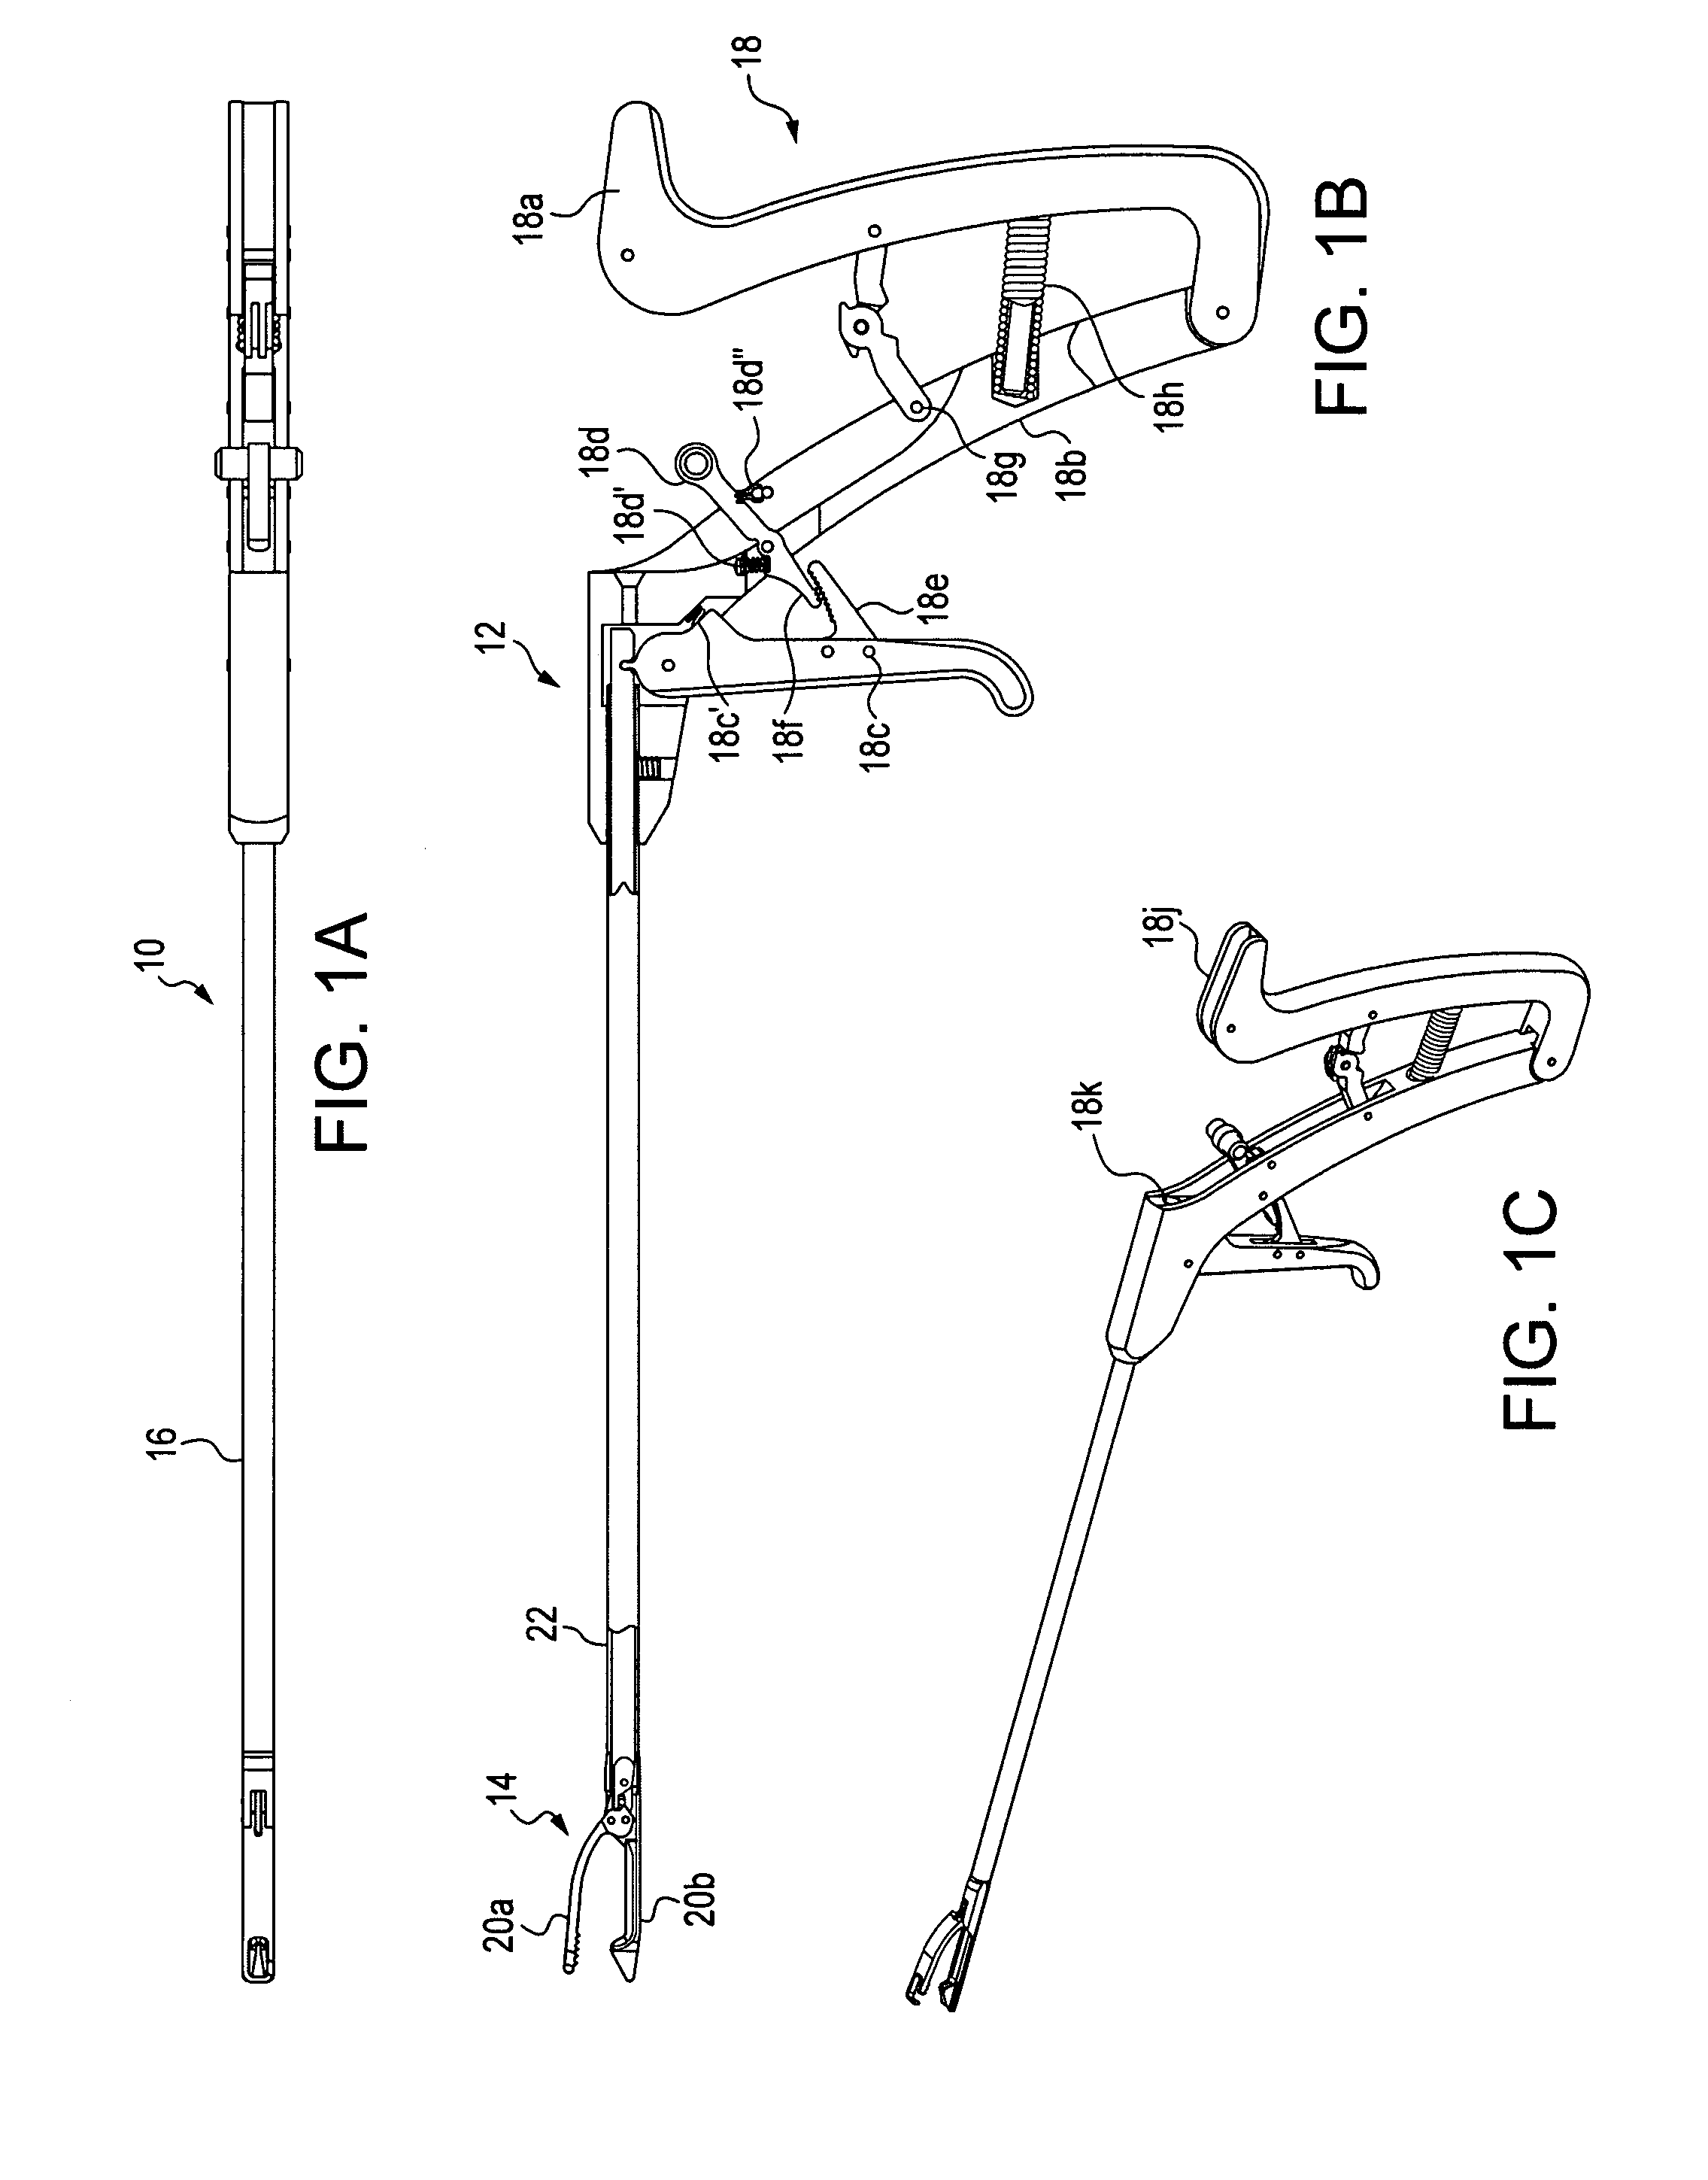 Suture passing instrument and method of passing suture